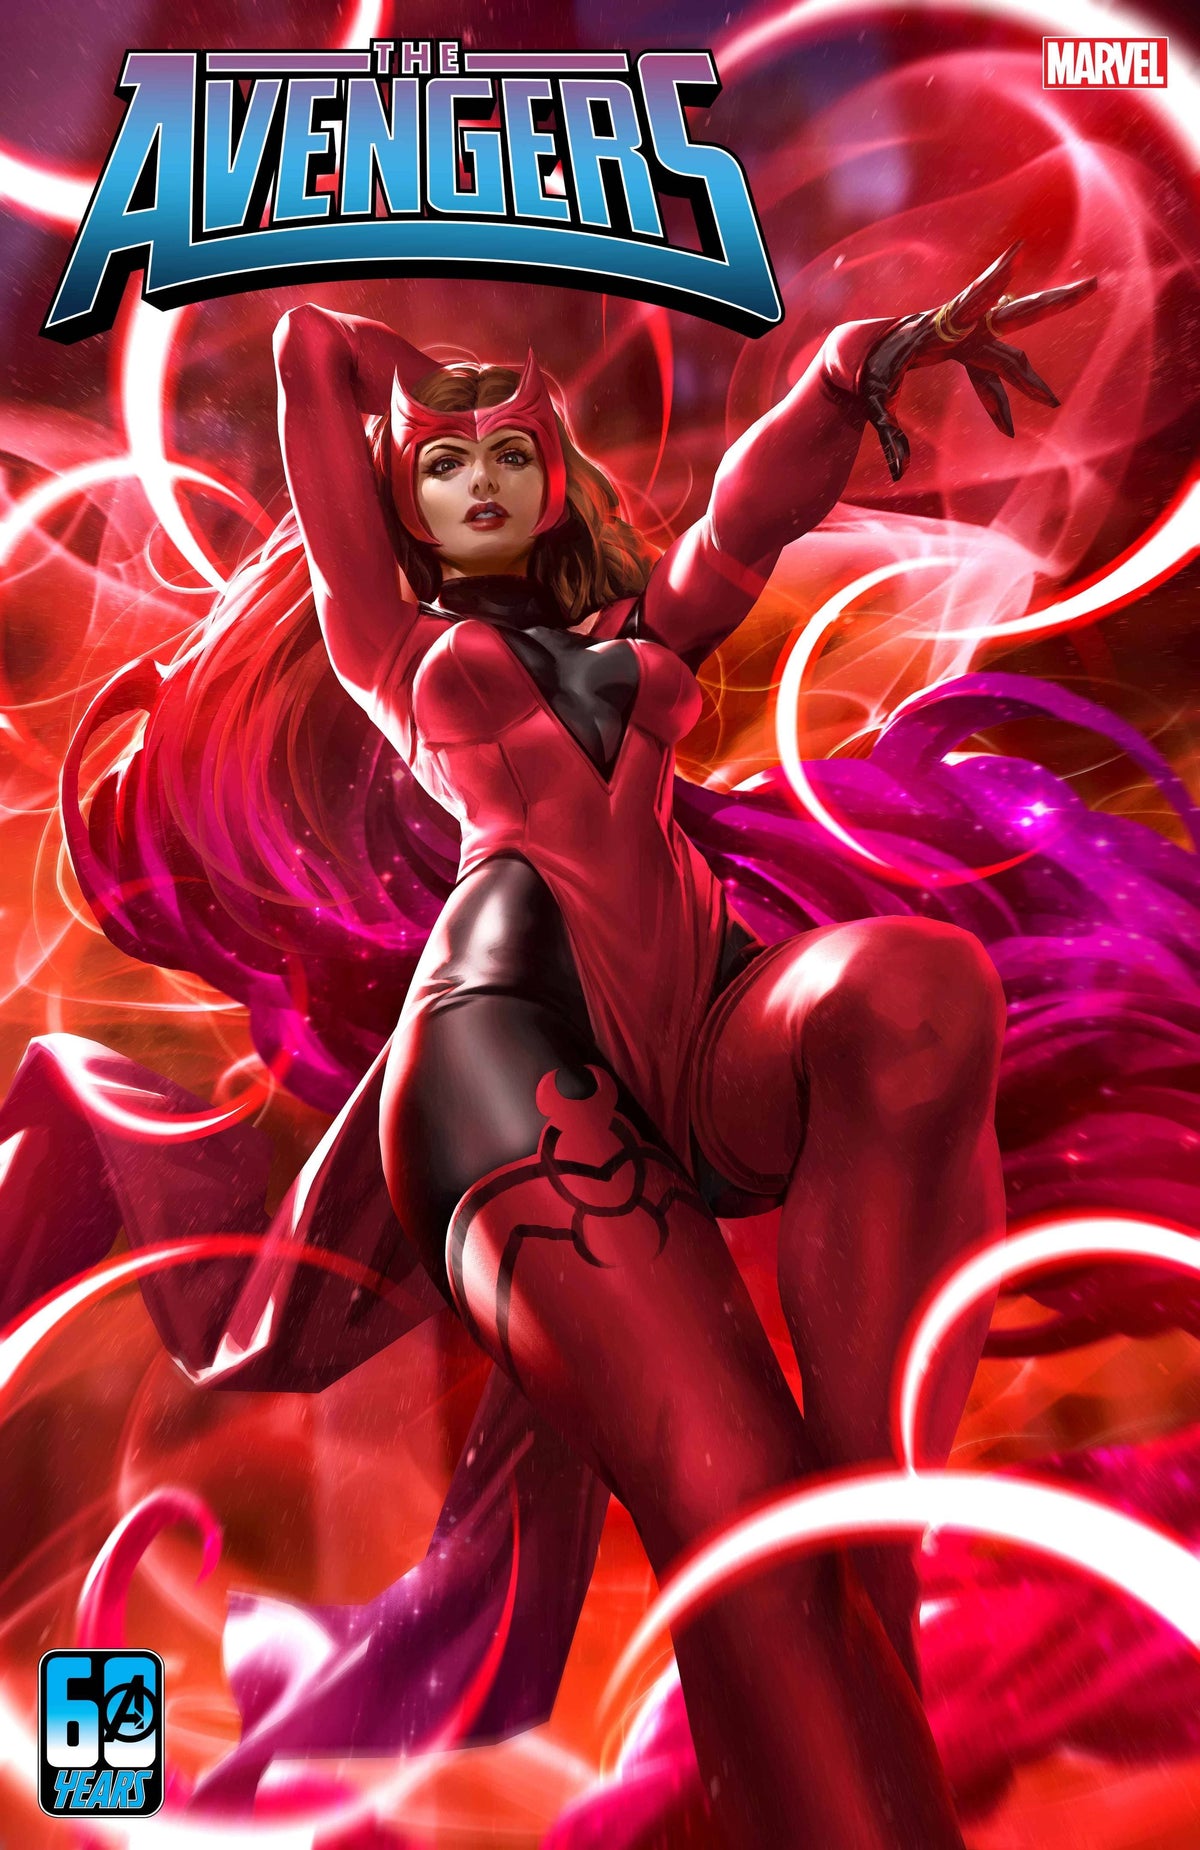 Preview: Scarlet Witch #8 - All-Comic.com  Scarlet witch comic, Scarlet  witch, Scarlet witch marvel